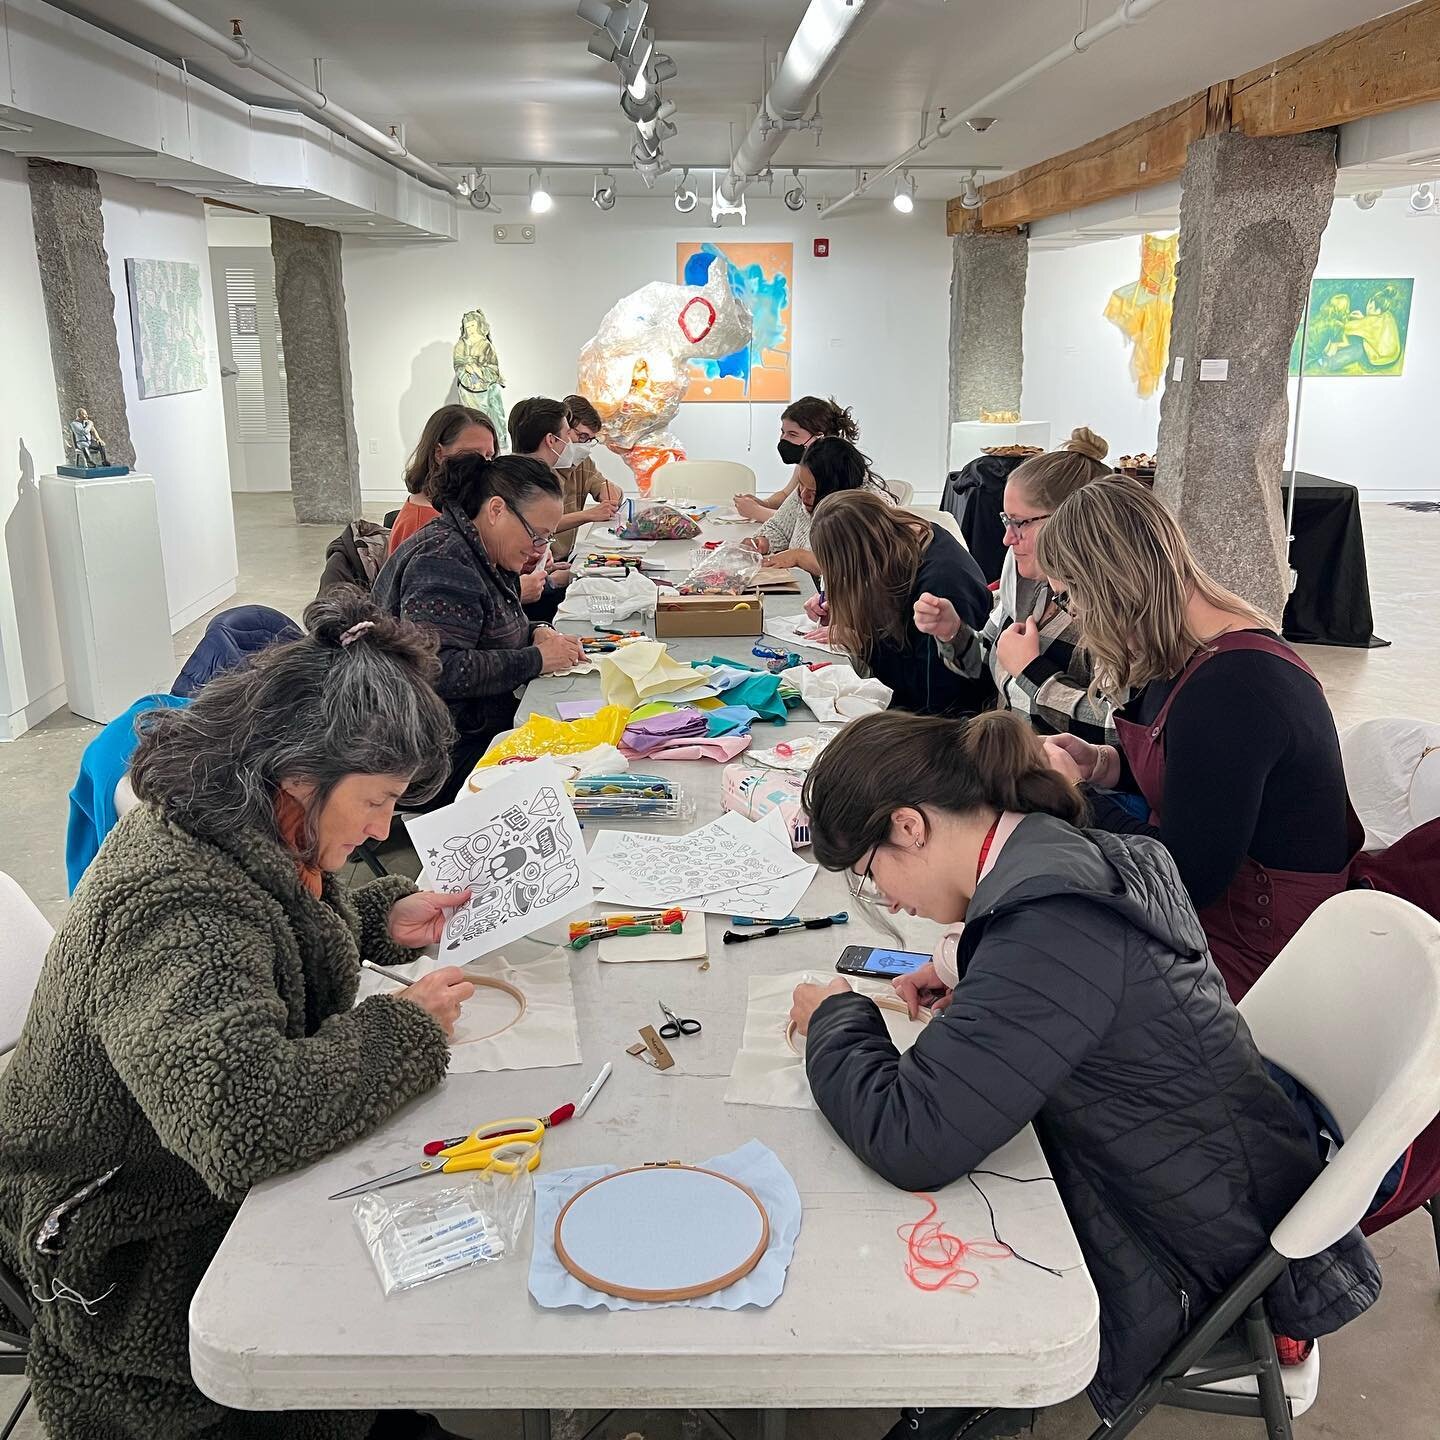 Nothing in the entire world makes me happier than making art in community. Nothing. Today I got to share #craftivism with these amazing humans inside the #SpeakUp exhibition in the @pianocraftgallery which I have a piece in (glimpse in slide two). I 